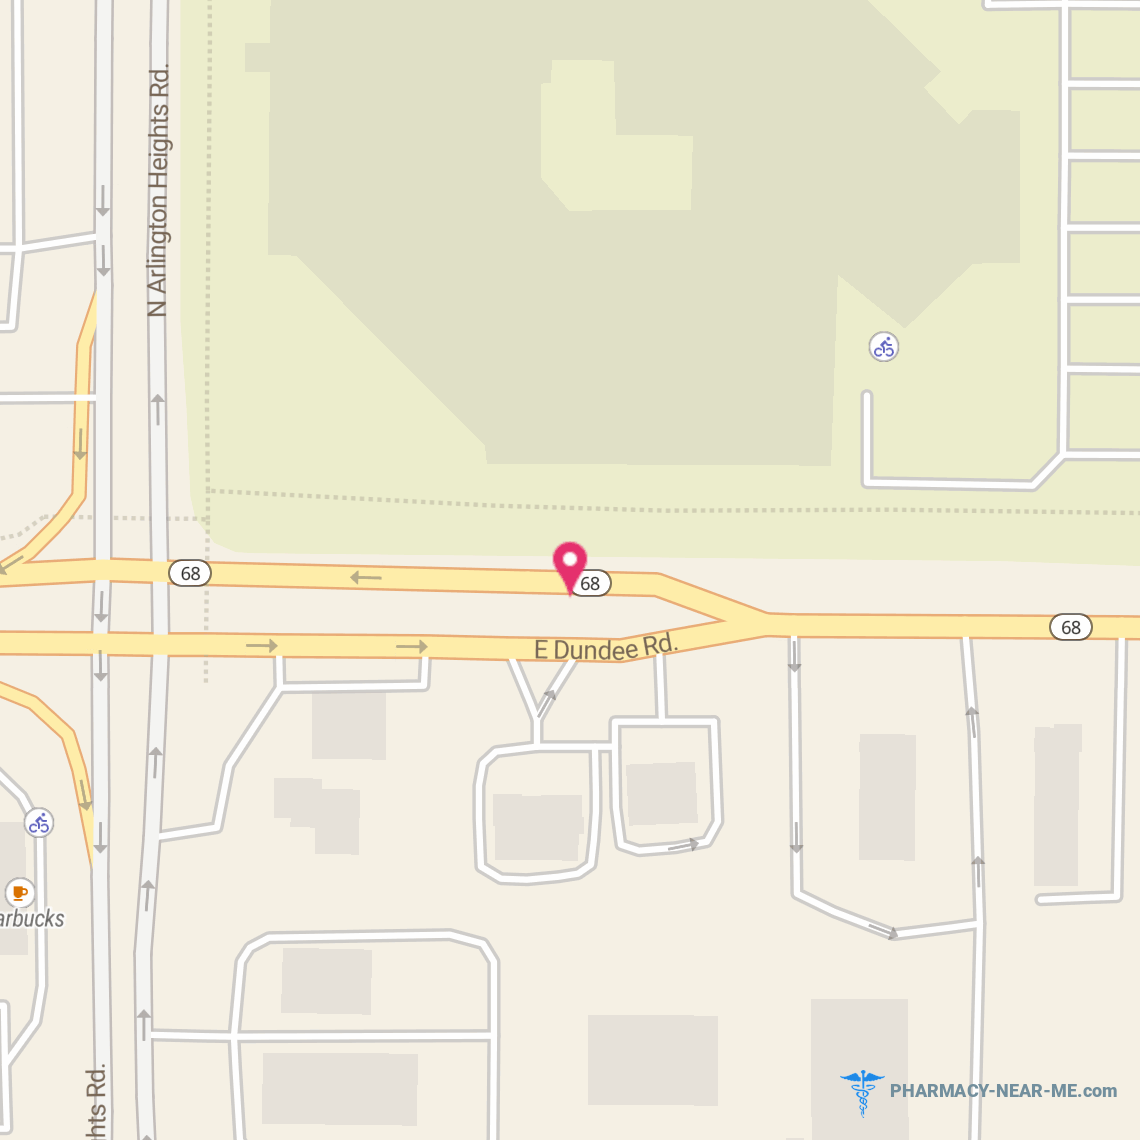 WALGREENS #05832 - Pharmacy Hours, Phone, Reviews & Information: 1225 West Dundee Road, Buffalo Grove, Illinois 60089, United States